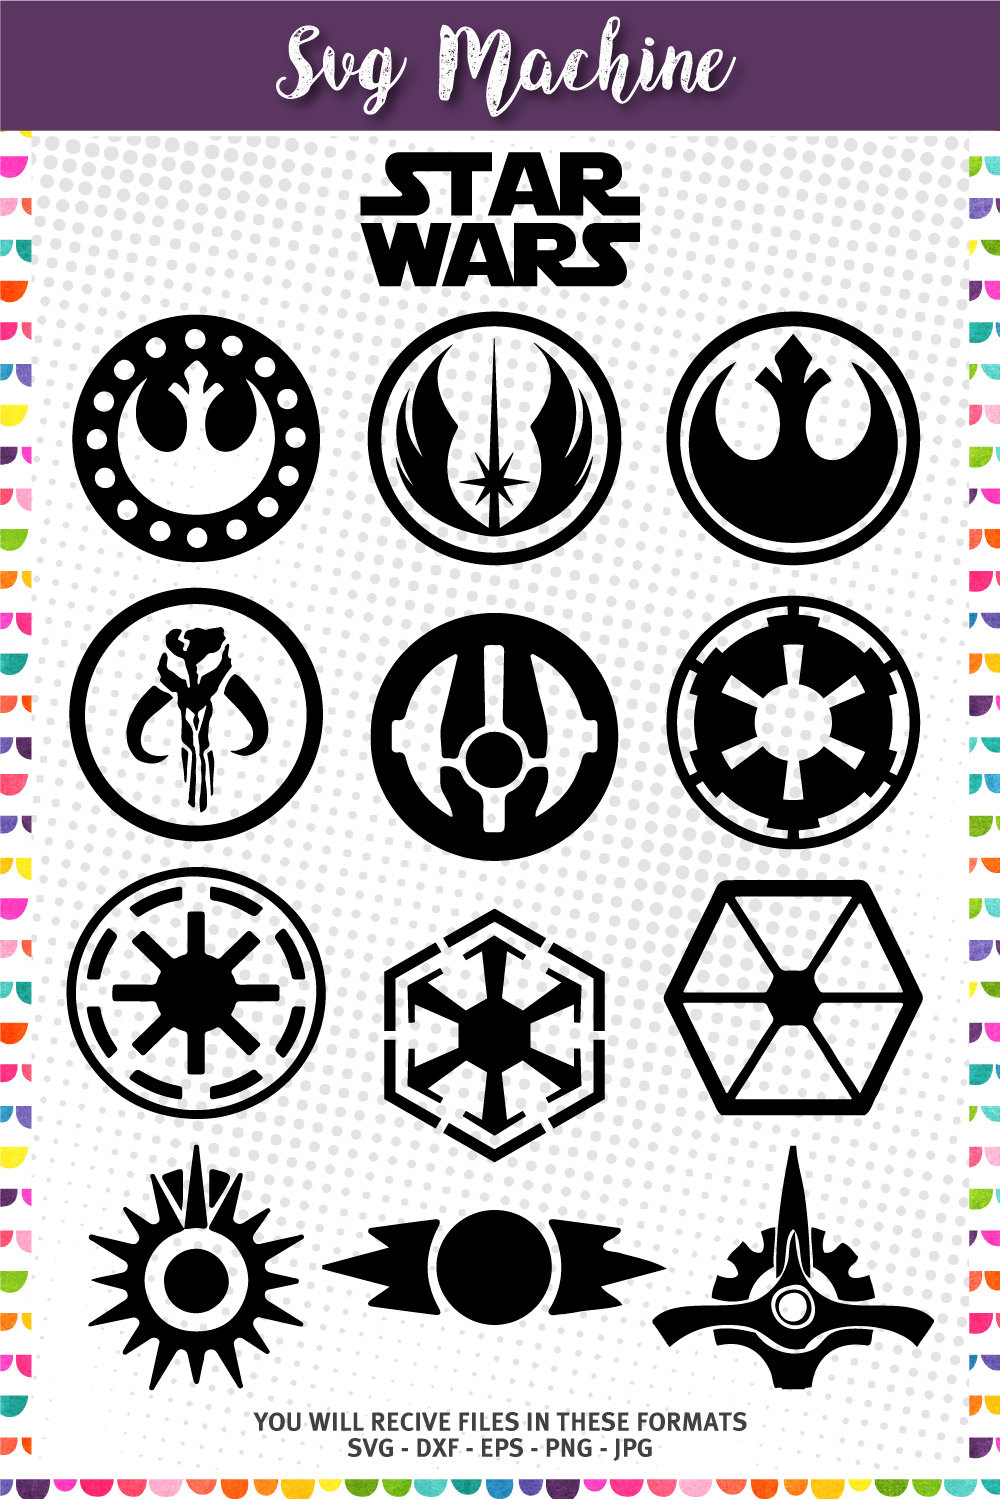 star wars SVG Cut Files for use with Silhouette Studio